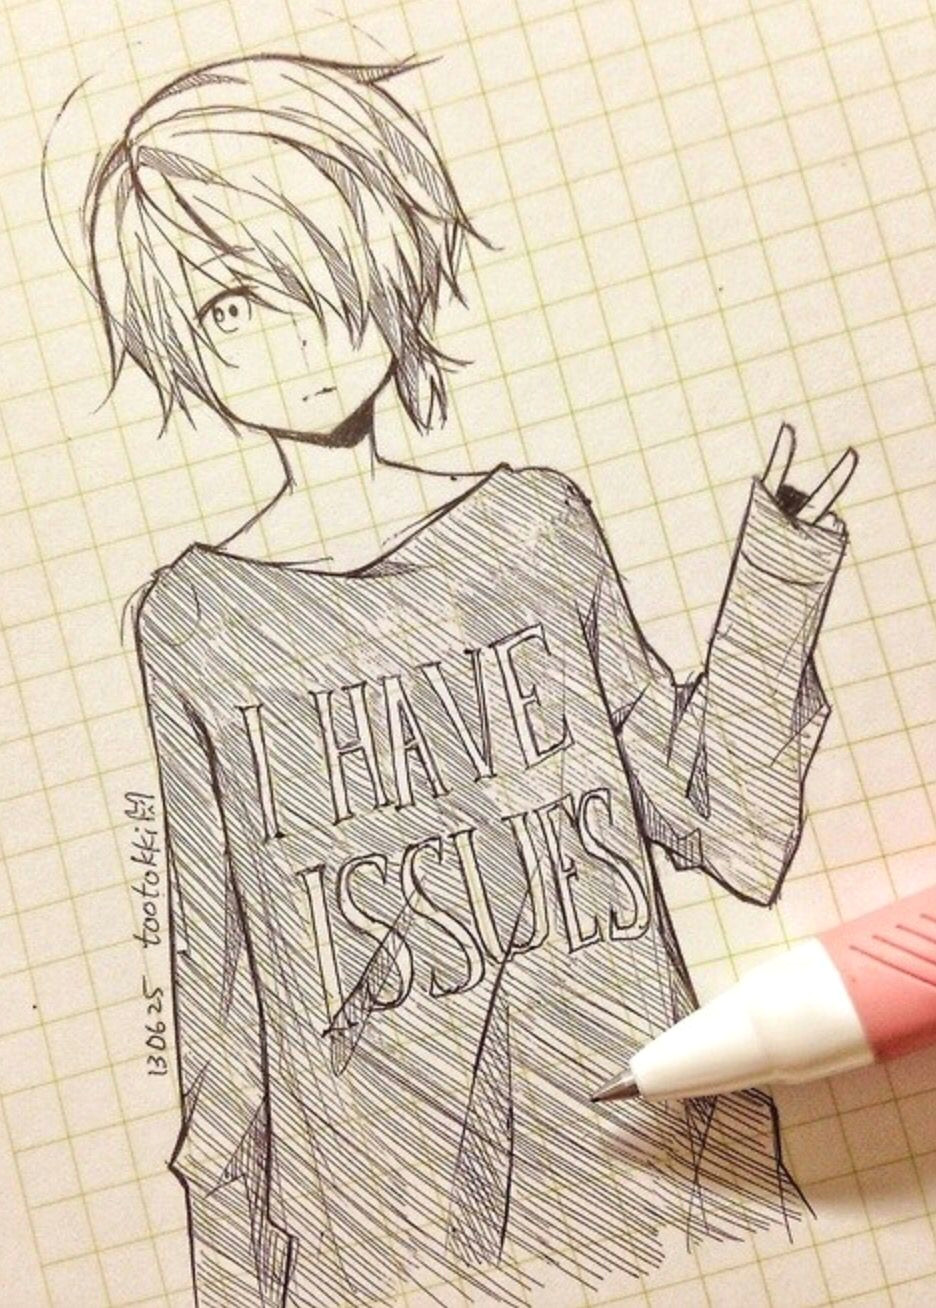 Anime Boys to Draw Cute Anime Drawing tootokki I Have issues Sweater Anime